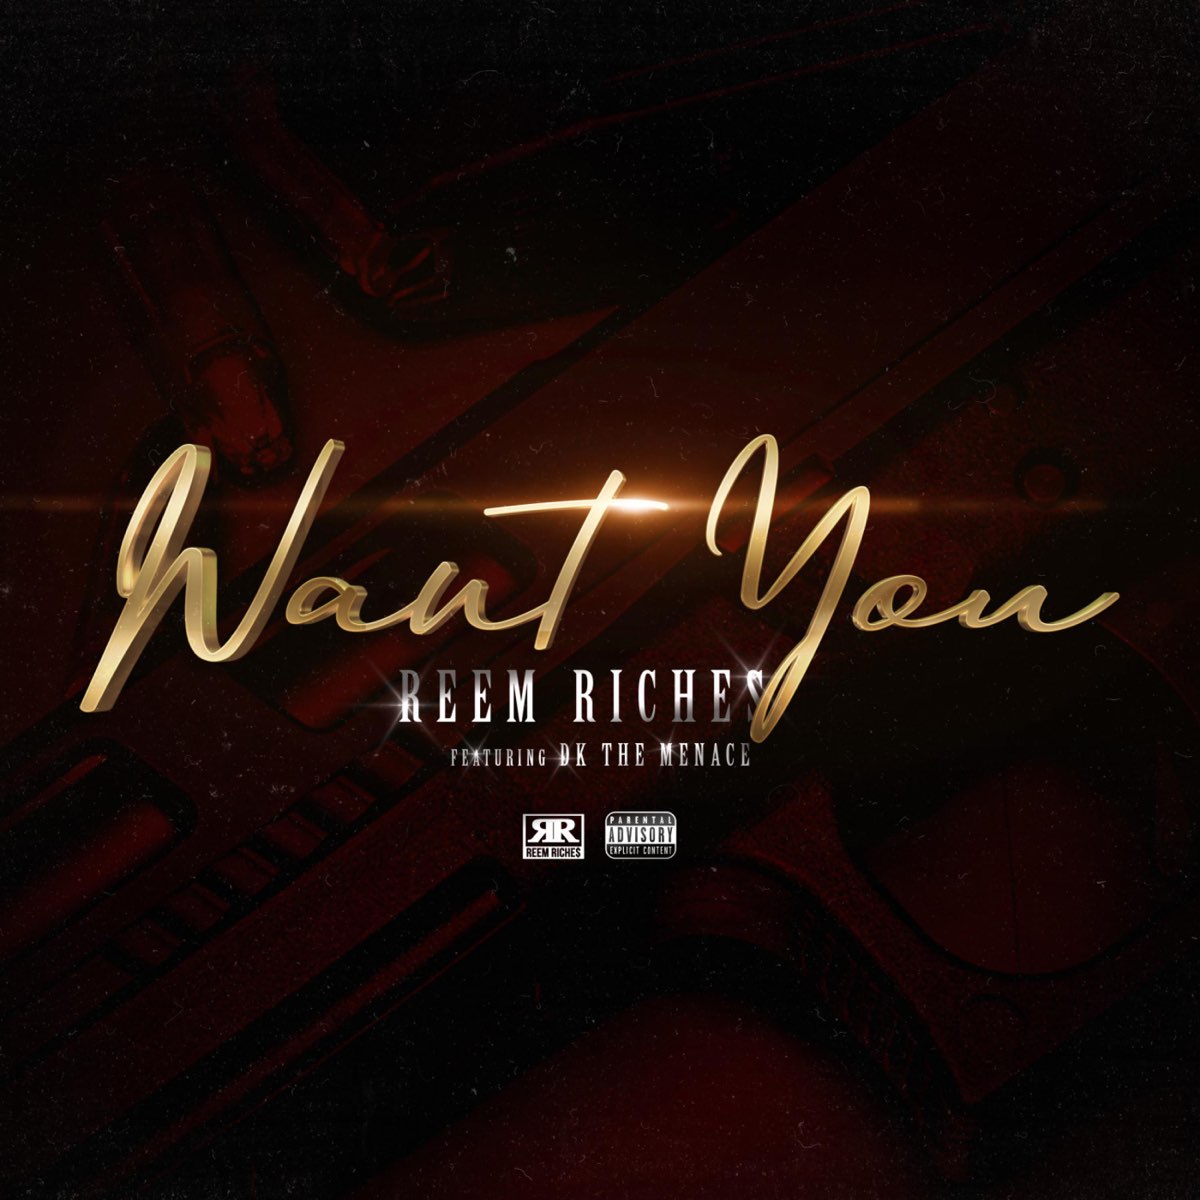 Want You (feat. DK the Menace) - Single by Reem Riches on Apple Music